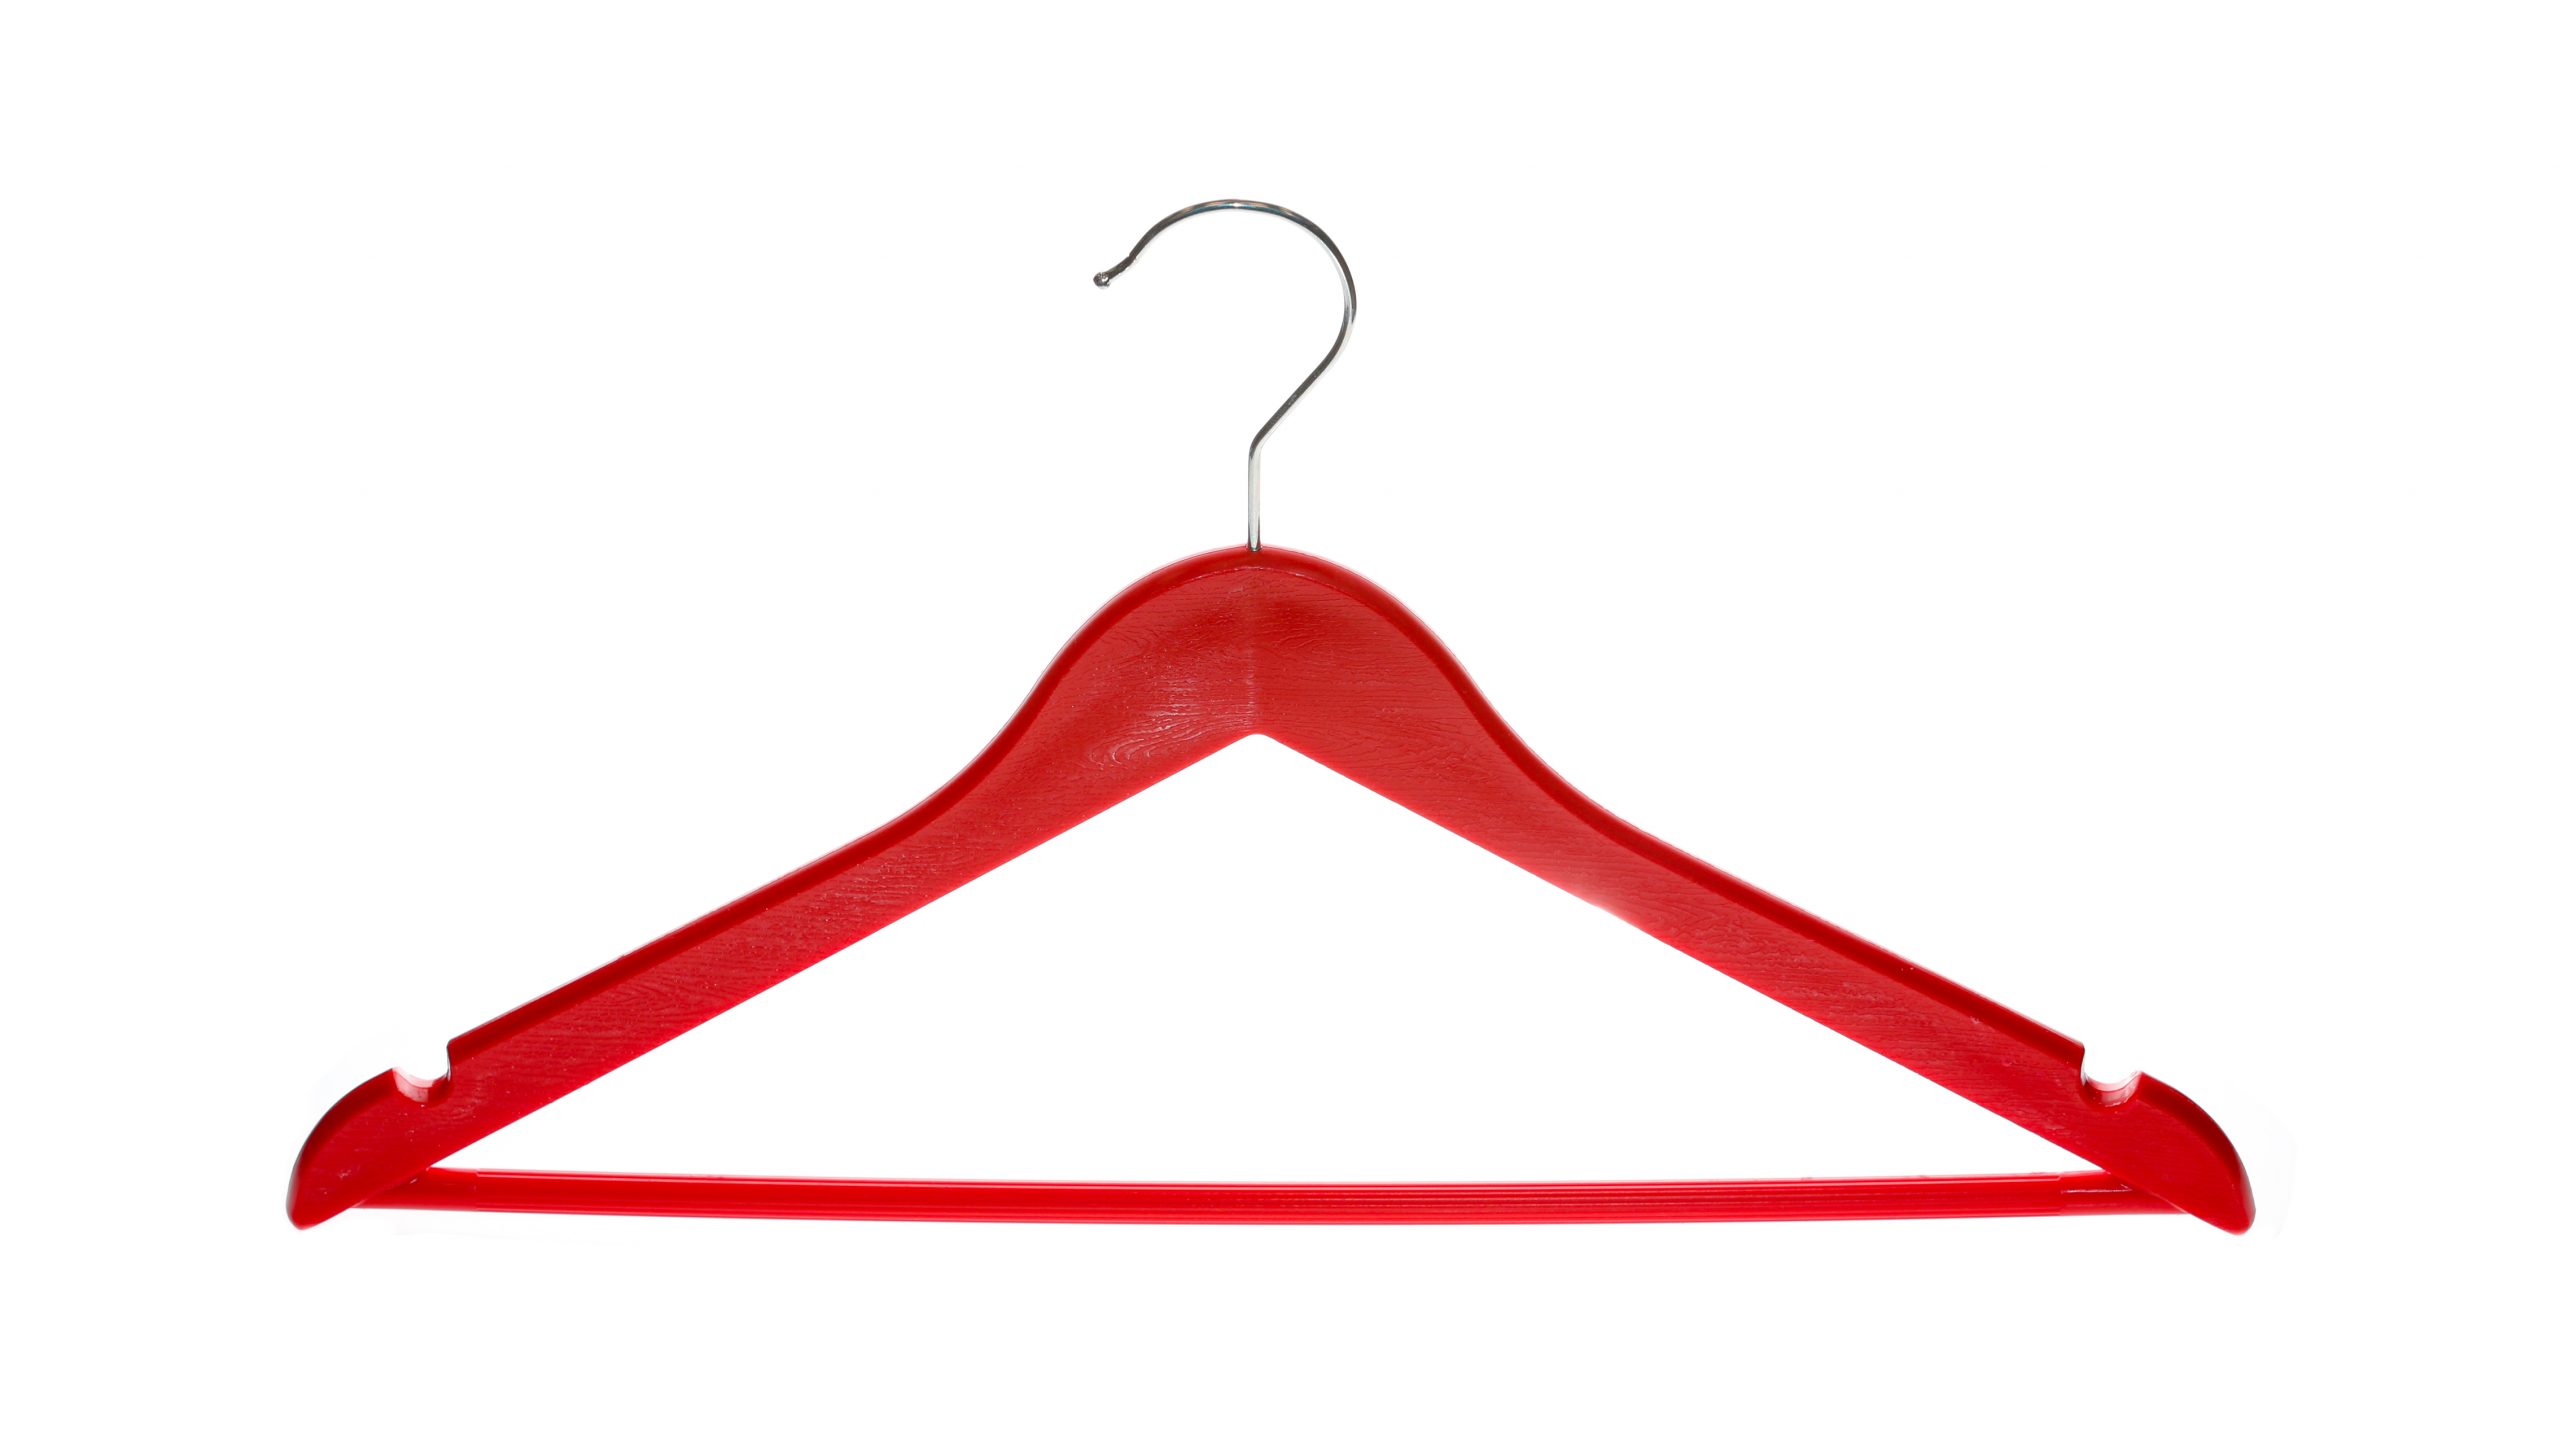 https://clothes-hangers.com/wp-content/uploads/2020/09/Imitation-Red-Wooden-Plastic-Hangers-with-Trouser-Bar-L1-scaled.jpg